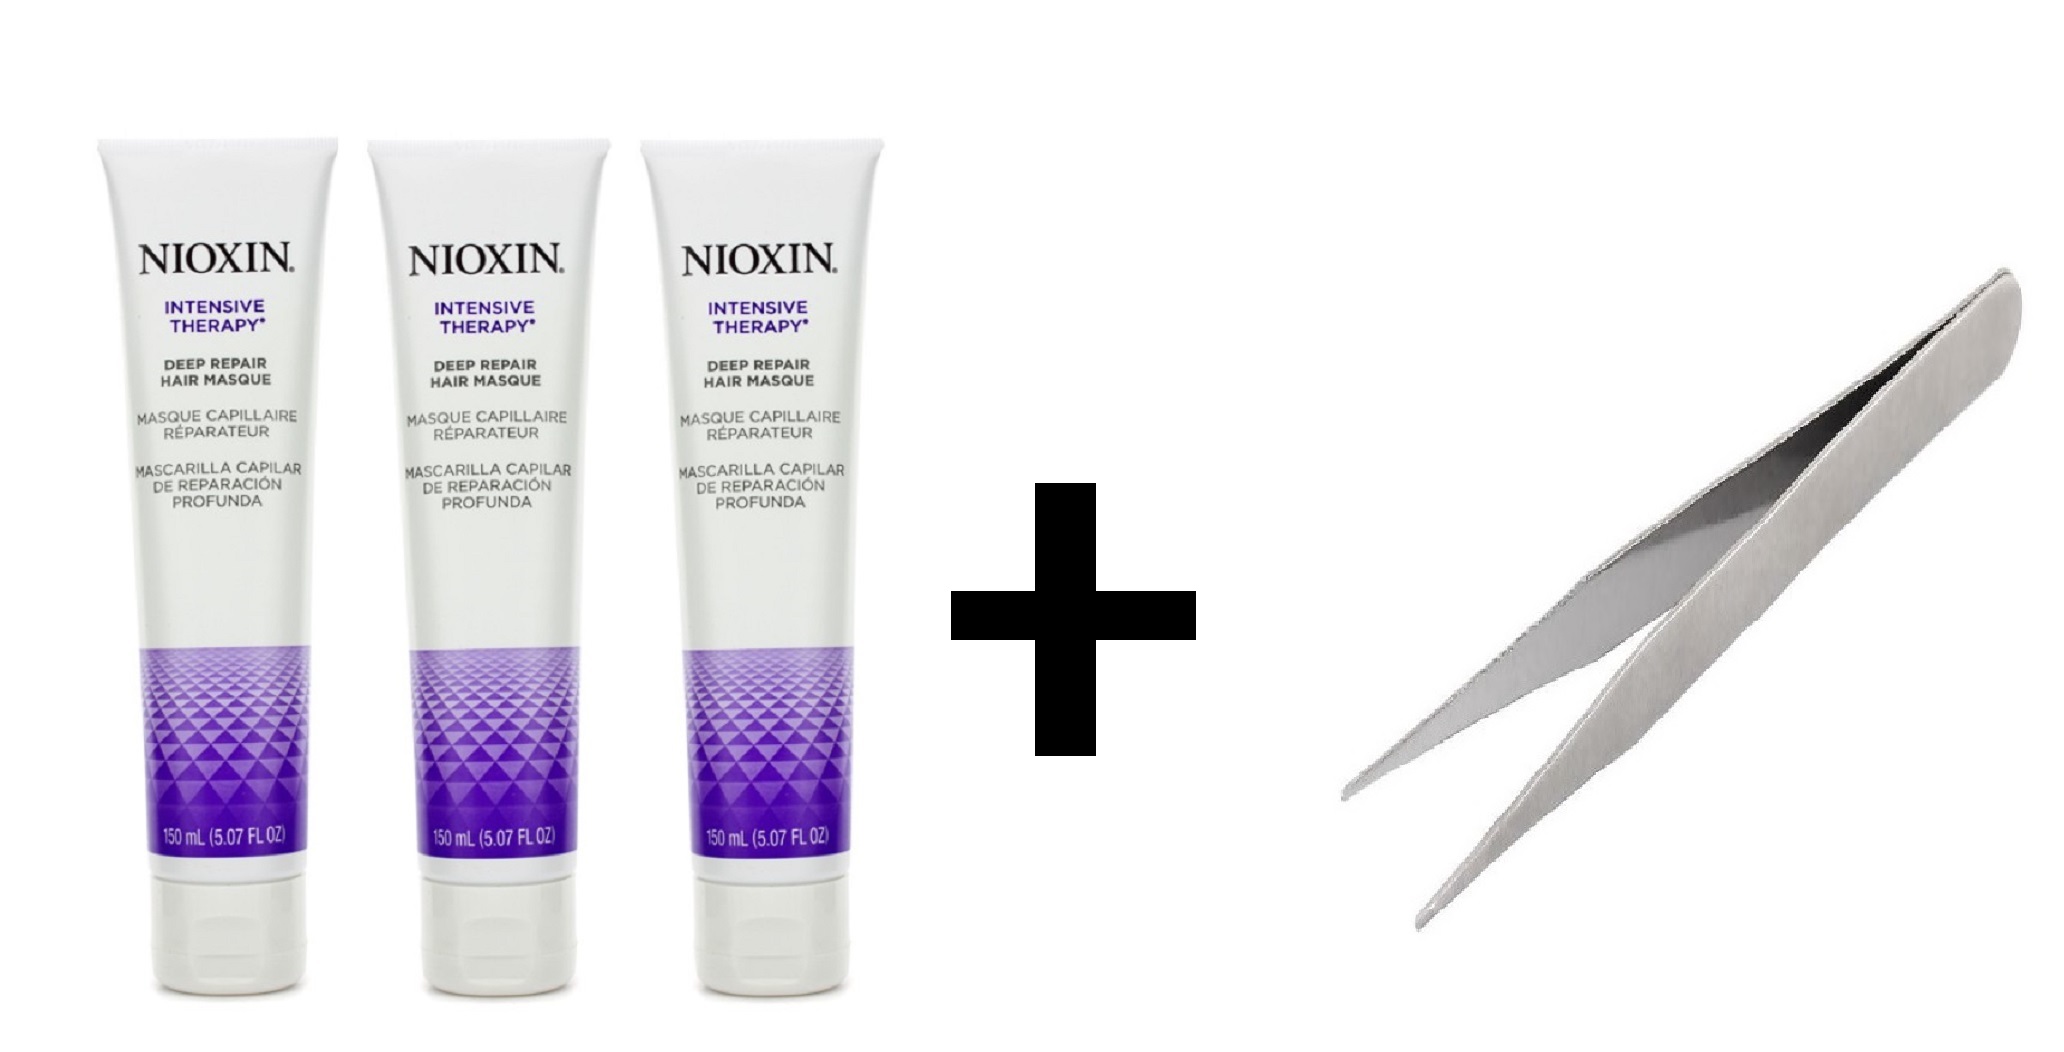 NIOXIN Intensive Therapy for Deep Repair Hair Masque 5.1 oz Pack of 3 with tweezer - image 1 of 1